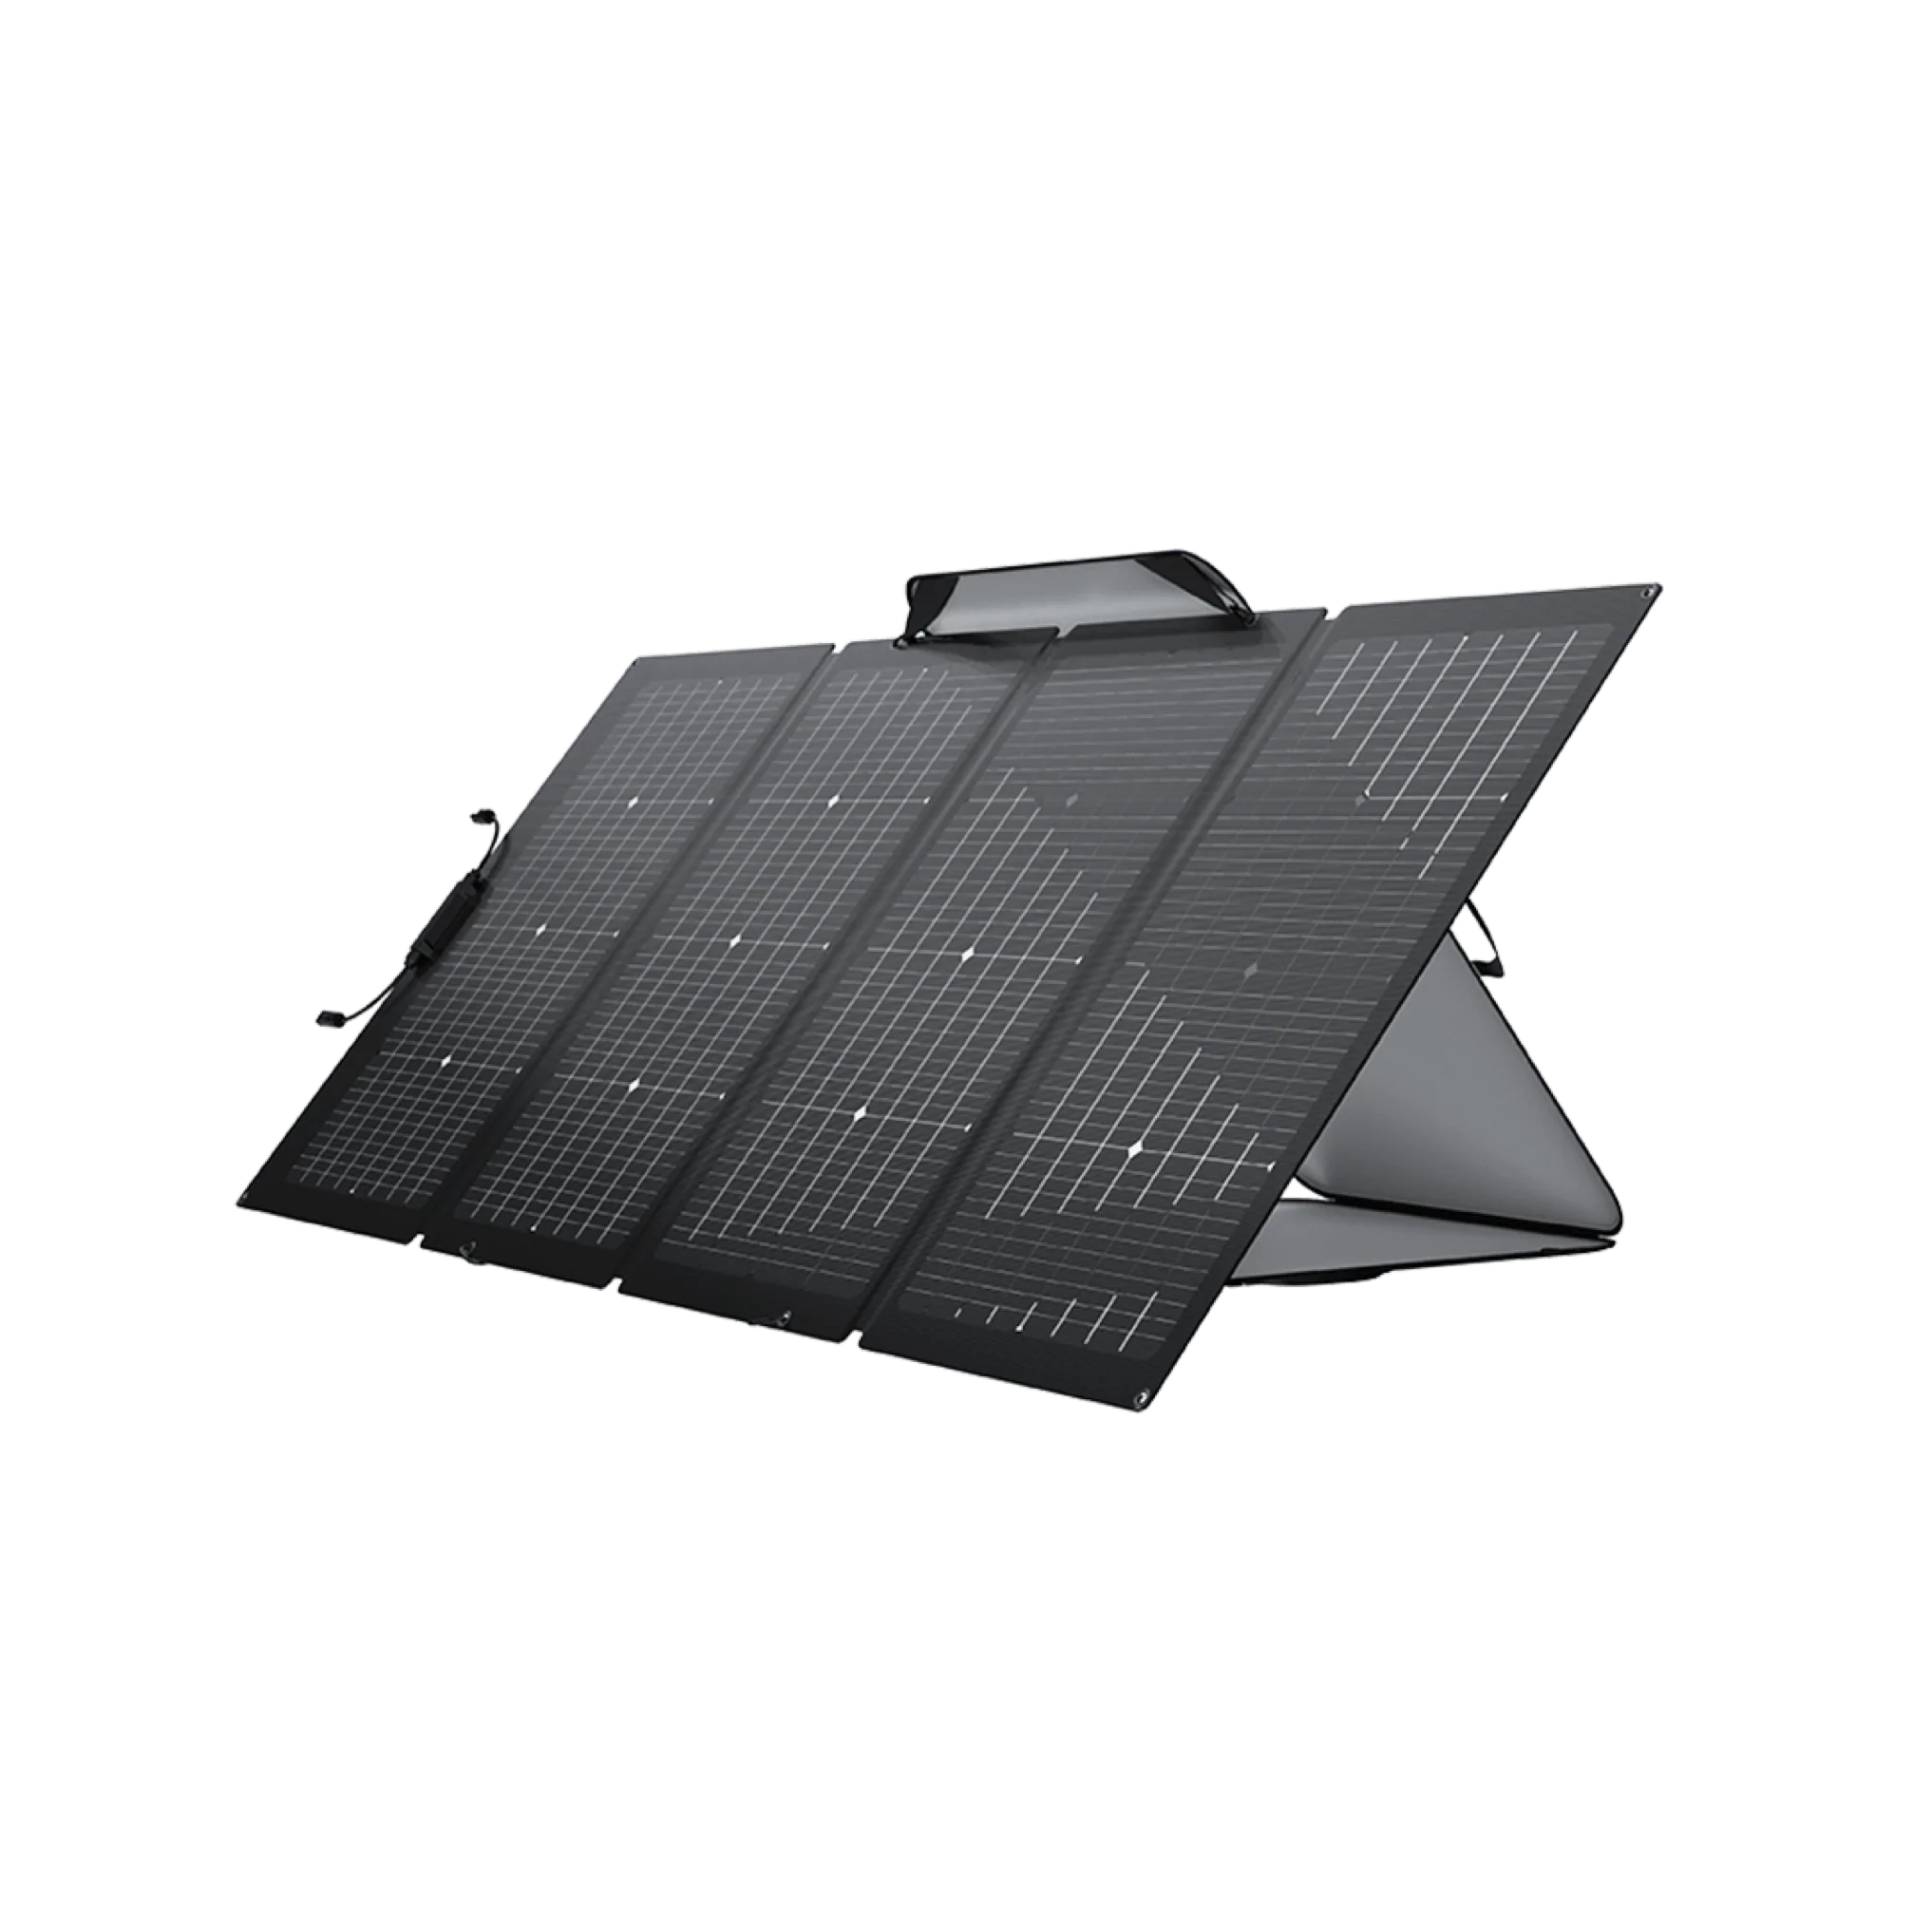 A portable solar panel from EcoFlow, featuring a black monocrystalline design, ideal for eco-conscious individuals.